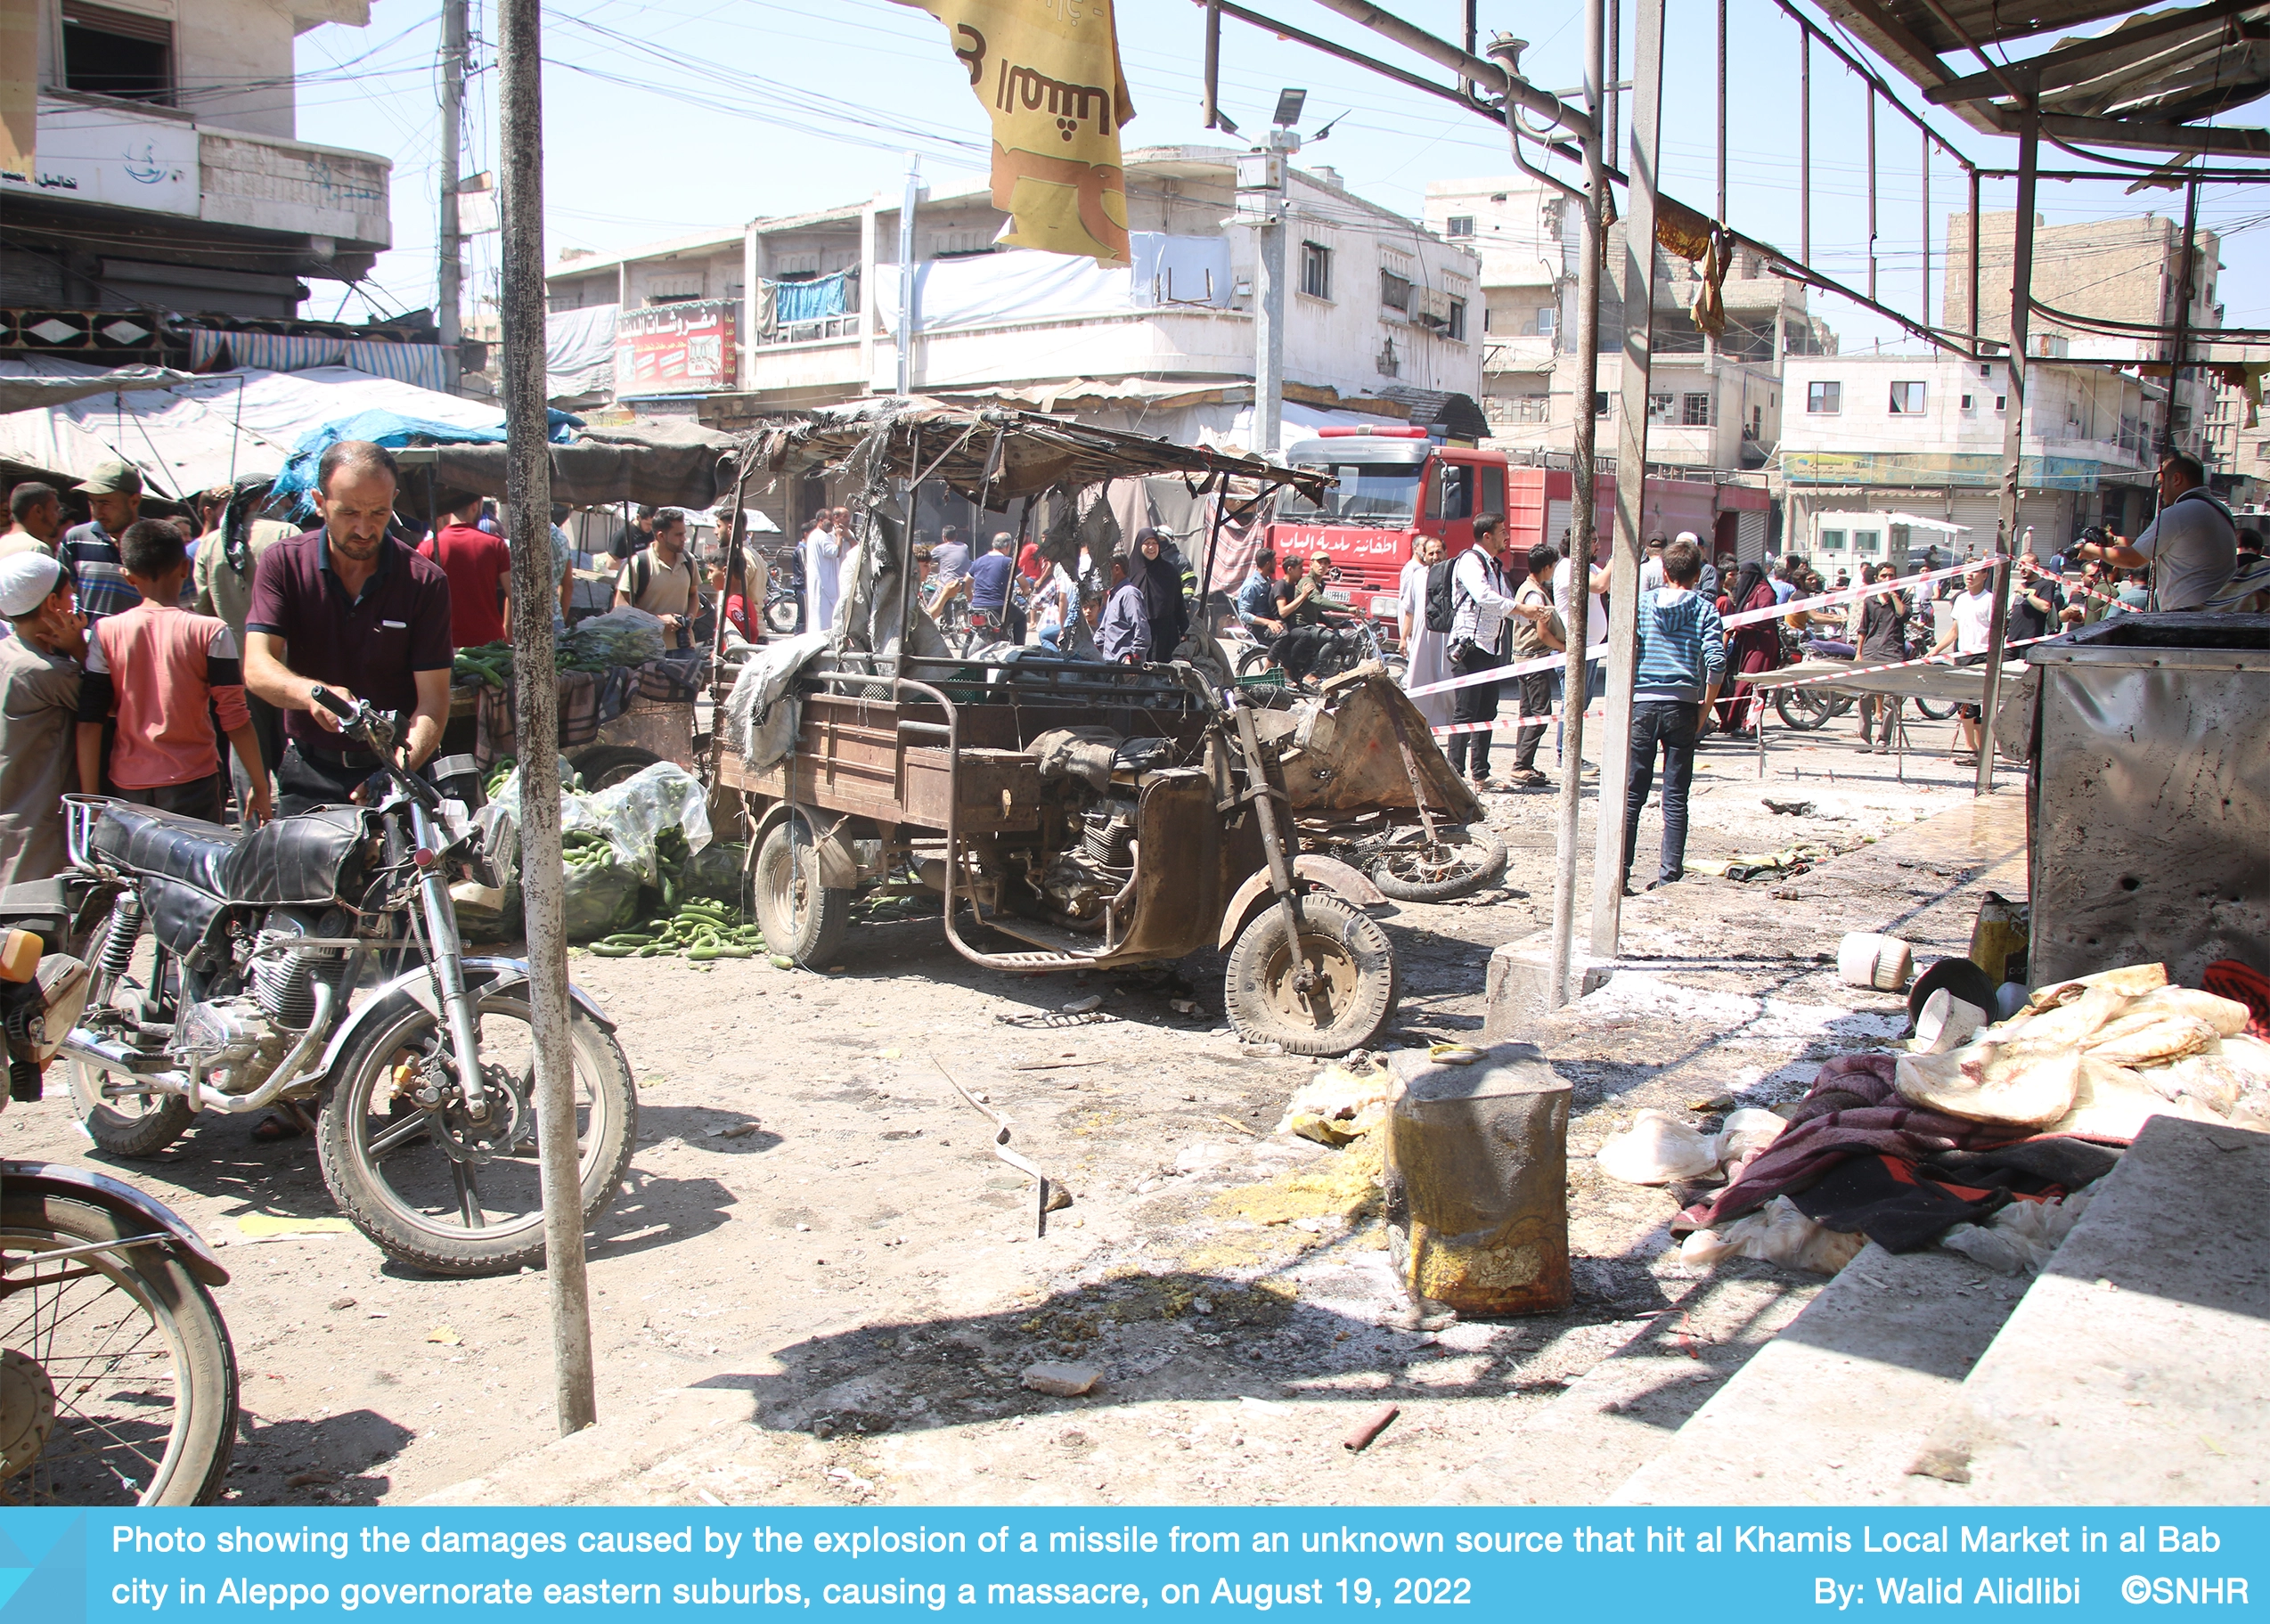 damage caused by the missile strike on al Khamis Local Market in al Bab city on 19-8-2022